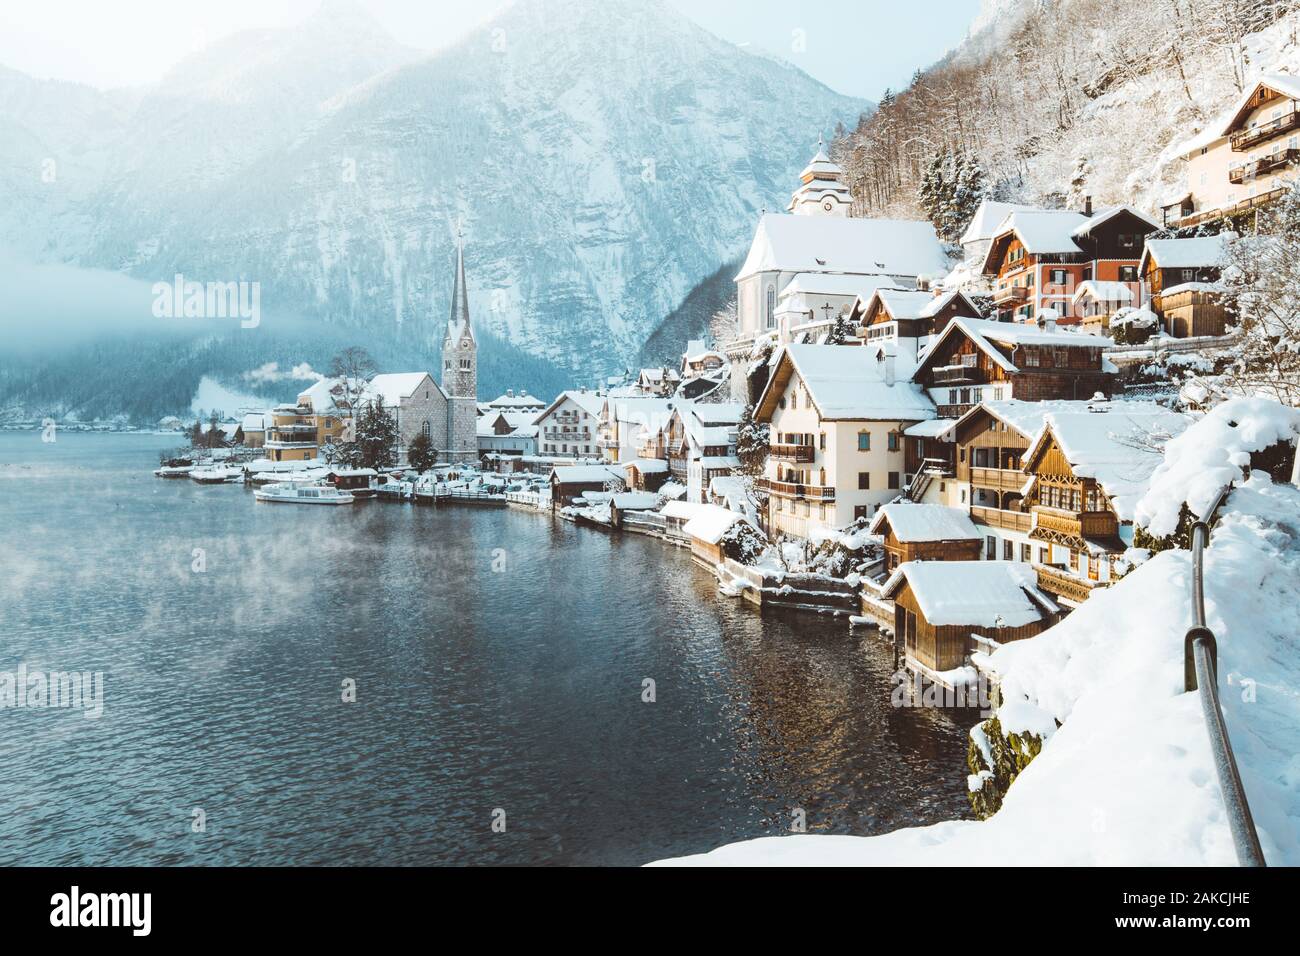 Classic postcard view of famous Hallstatt lakeside town in the Alps with passenger ship on a beautiful cold sunny day with blue sky and clouds in wint Stock Photo